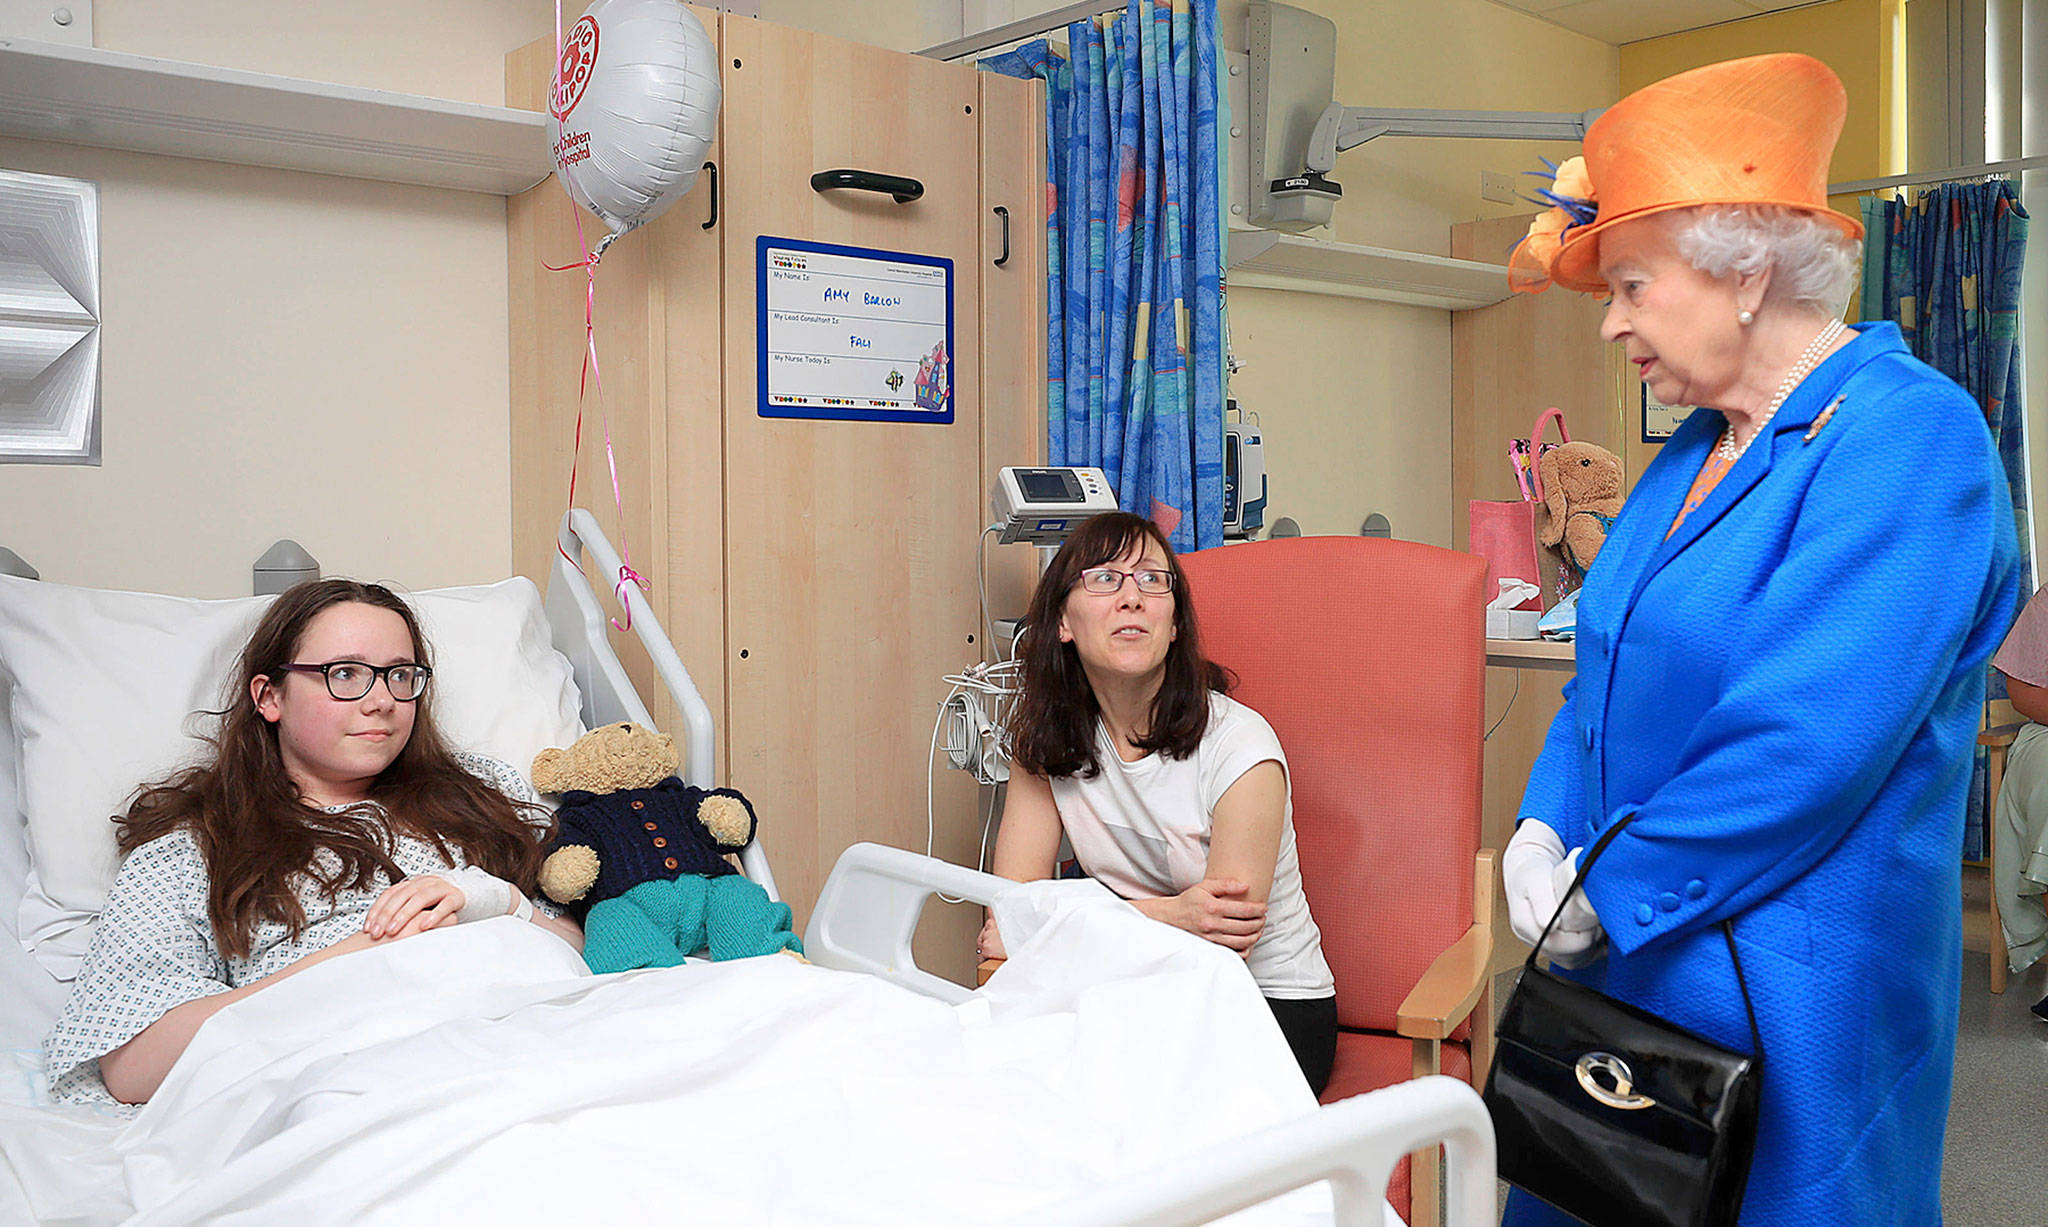 Britain’s Queen Elizabeth II (right) speaks to Amy Barlow (left), 12, from Rawtenstall, Lancashire, and her mother, Kathy, on Thursday at the Royal Manchester Children’s Hospital in Manchester England. The queen met with victims of the terror attack in the city earlier this week. (Peter Byrne/Pool via AP)